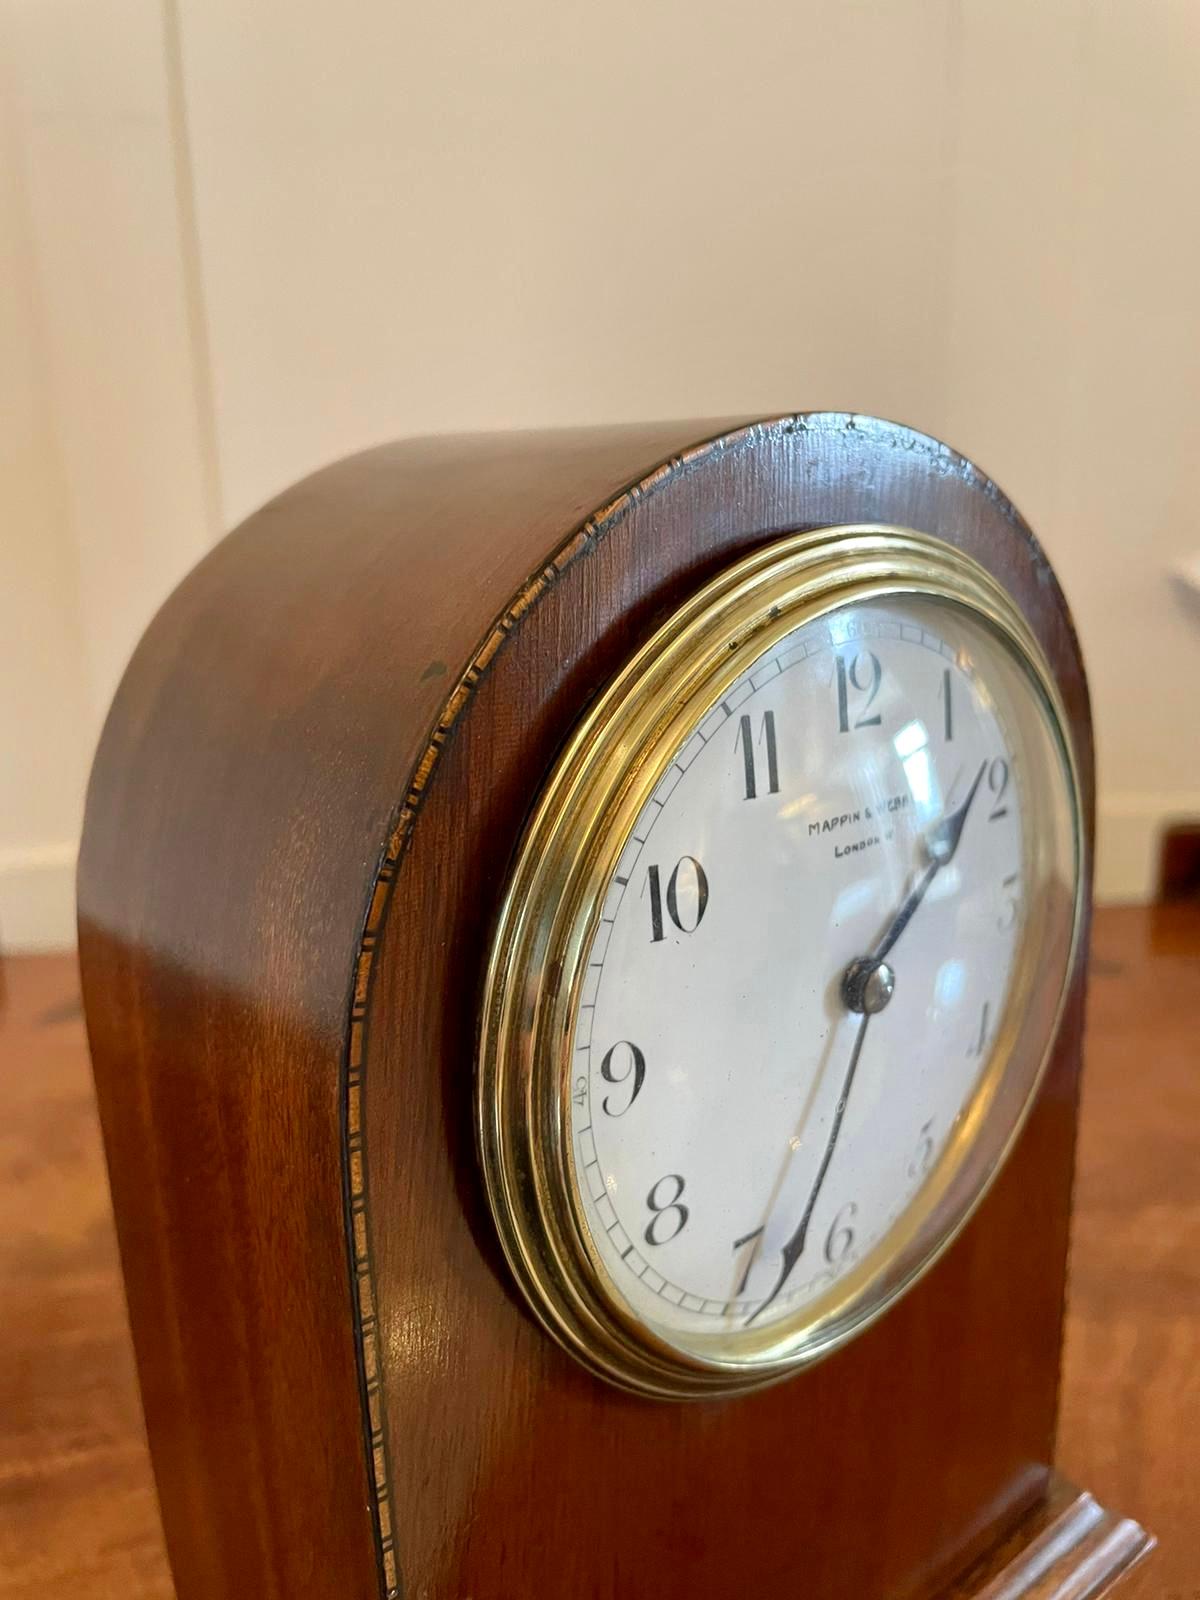 Antique inlaid mahogany mantel clock by Mappin & Webb holders of Royal Warrants to British monarchs since 1897 having a dome top case with pretty chequered inlay, porcelain face with original hands and eight day movement with original brass bezel